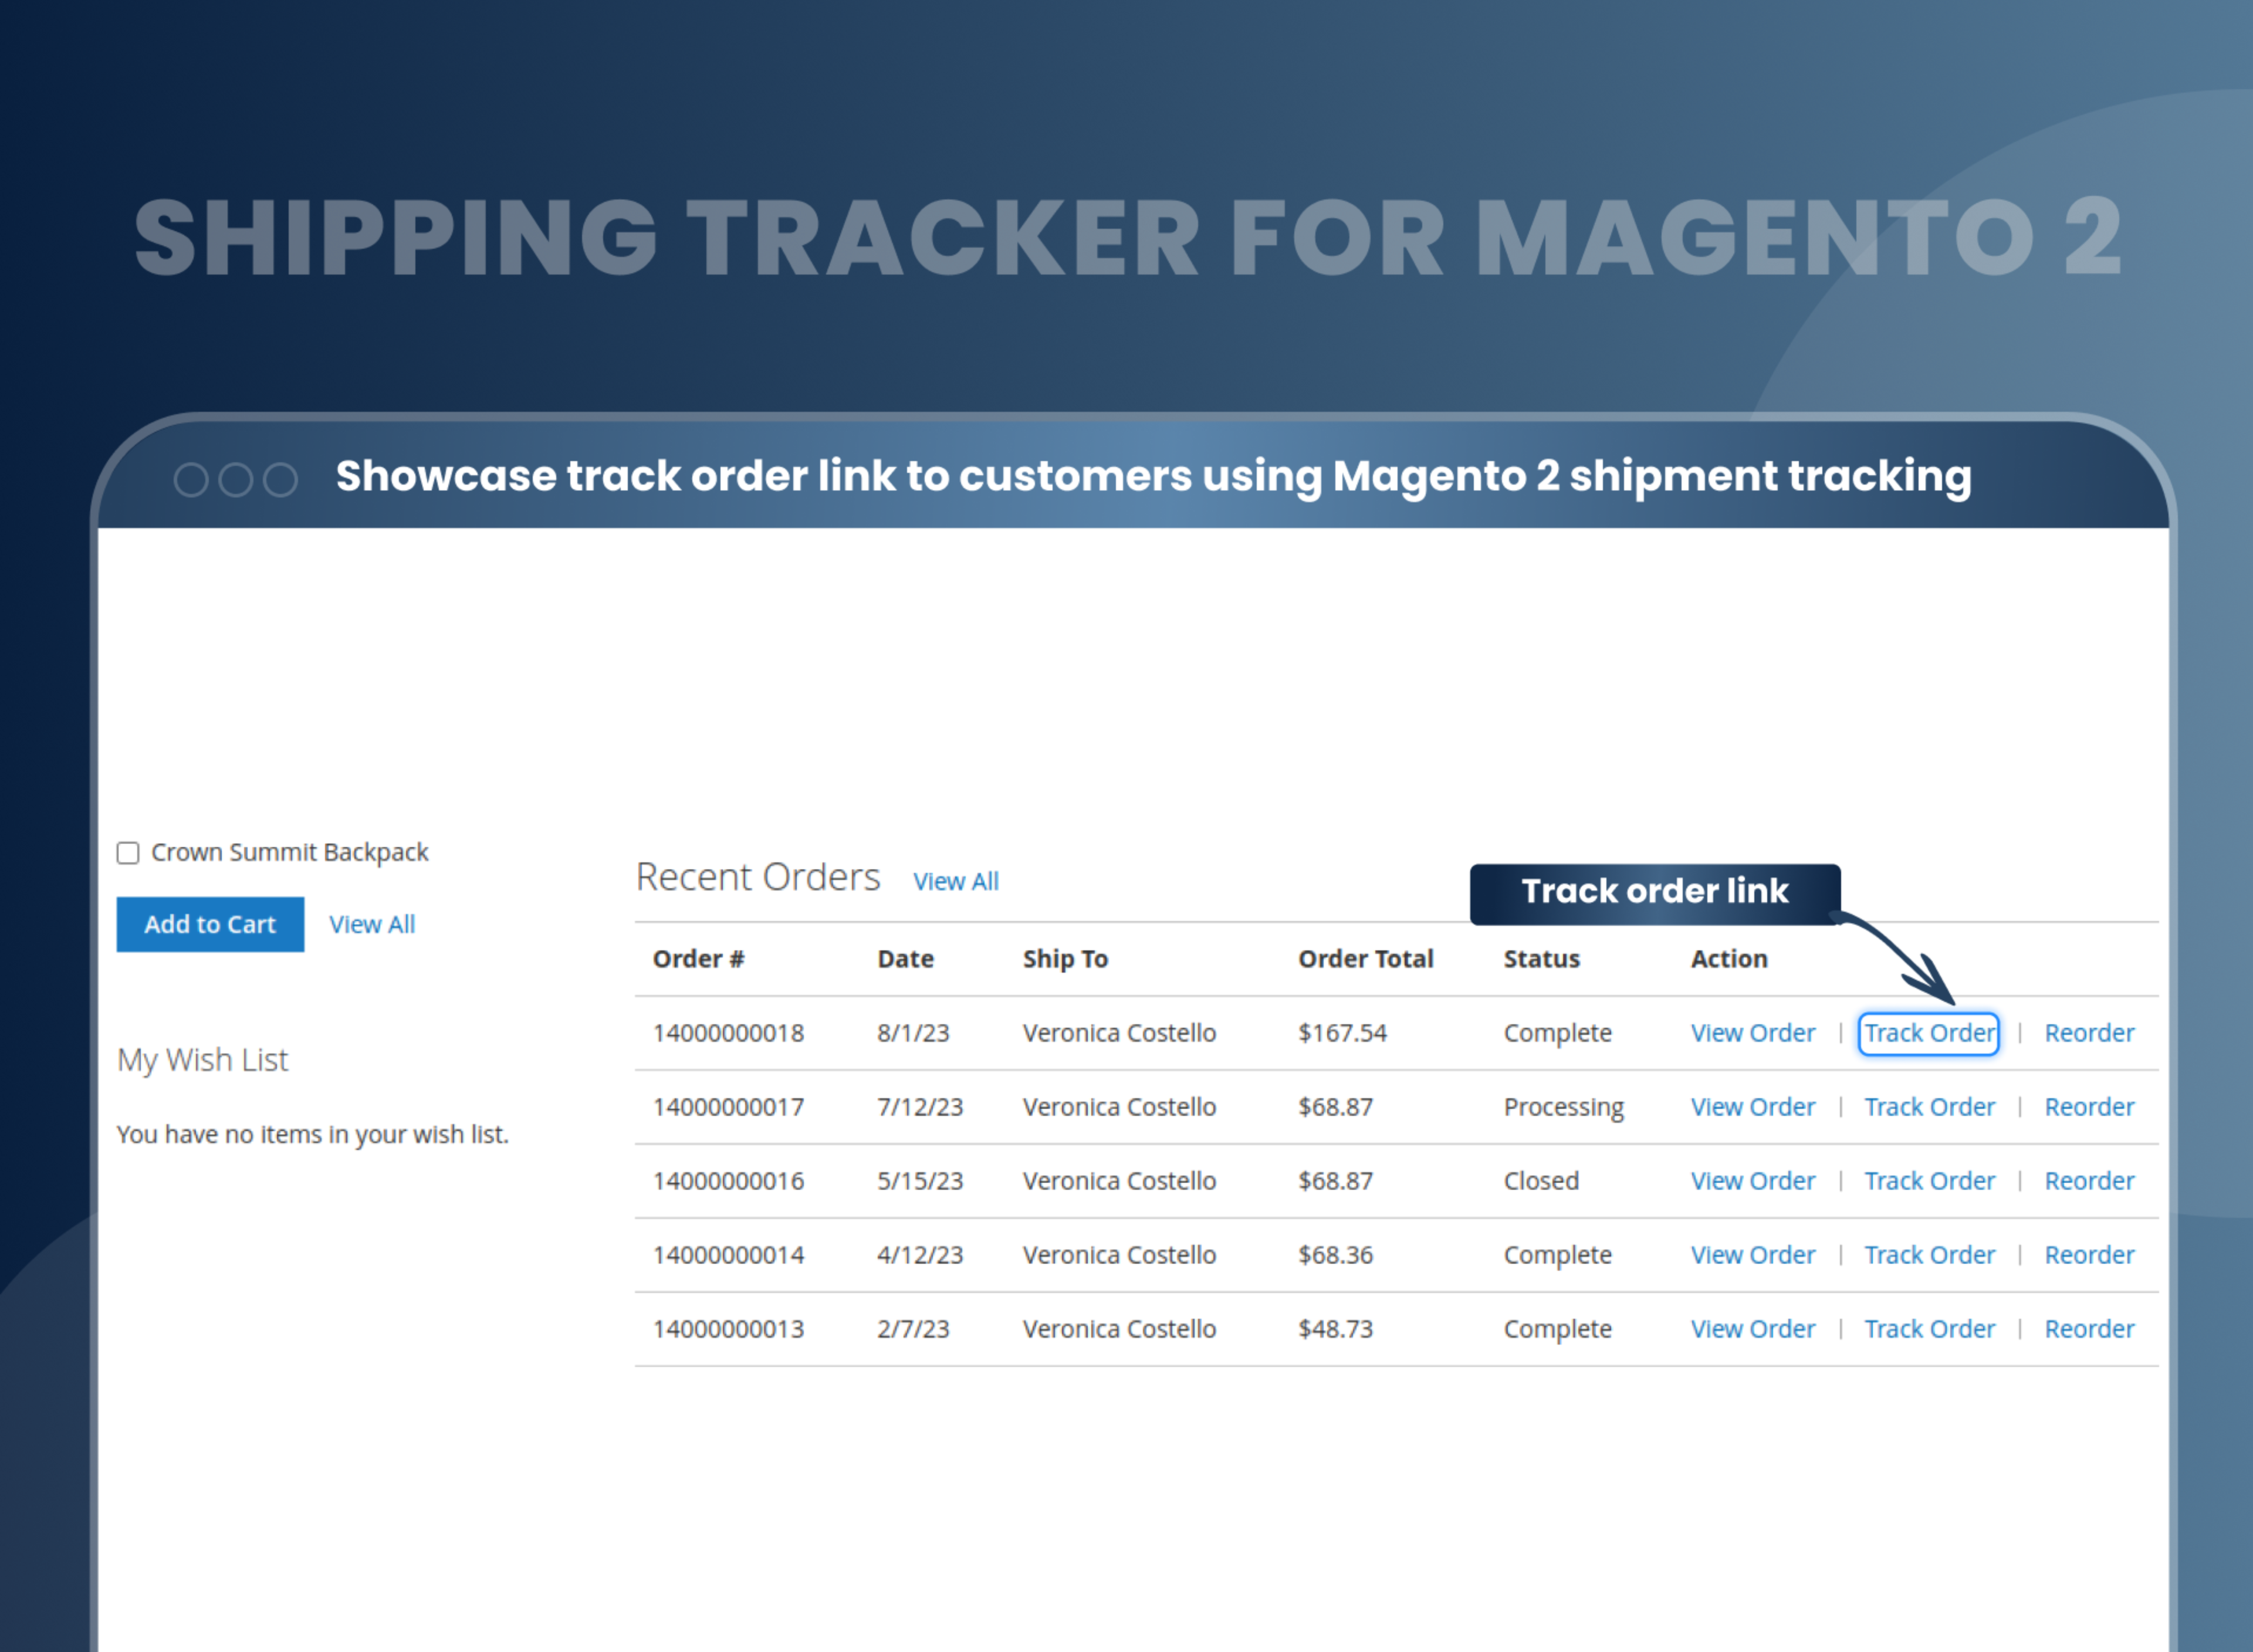 Showcase track order link to customers using Magento 2 shipment tracking